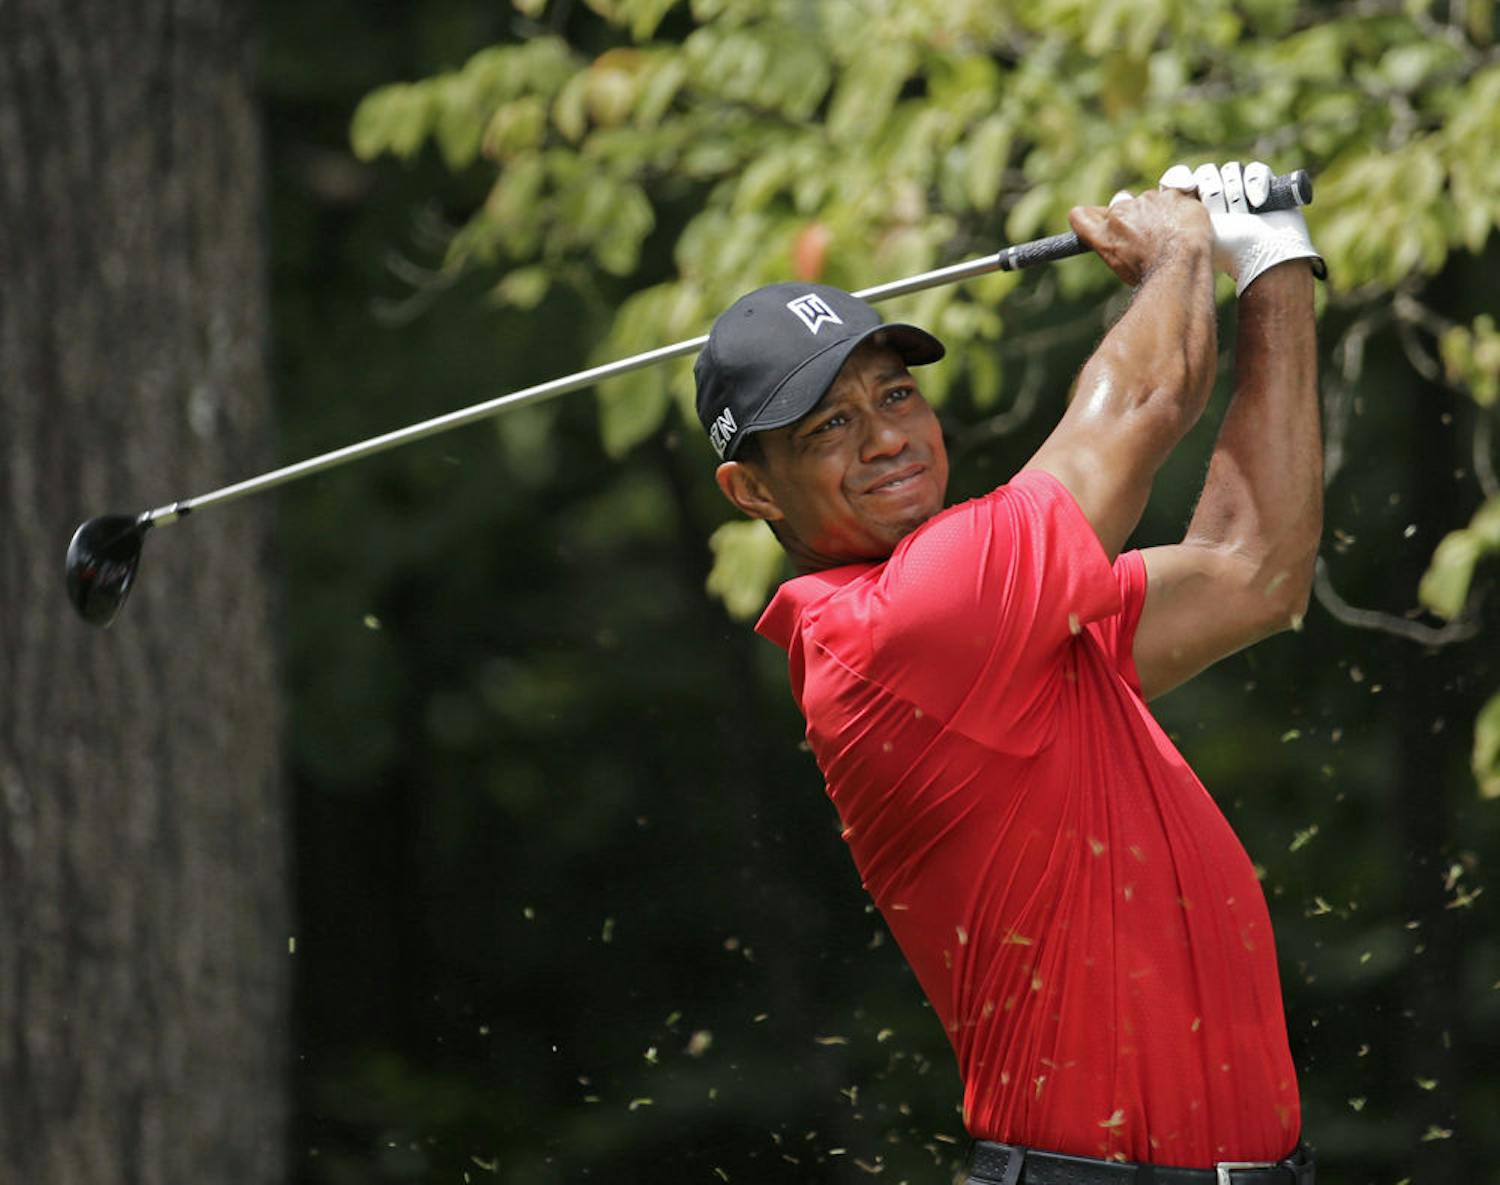 FILE - In this Aug. 23, 2015, file photo, Tiger Woods watches his tee shot on the second hole during the final round of the Wyndham Championship golf tournament at Sedgefield Country Club in Greensboro, N.C. Tiger Woods has posted a video of him swinging a 9-iron in a golf simulator. His agent says the video was posted to rebut rumors on social media that he had taken a turn for the worse following two back surgeries last fall. Mark Steinberg of Excel Sports Management said Monday, Feb. 22, 2016, that the rumors were ridiculous. (AP Photo/Chuck Burton, File)